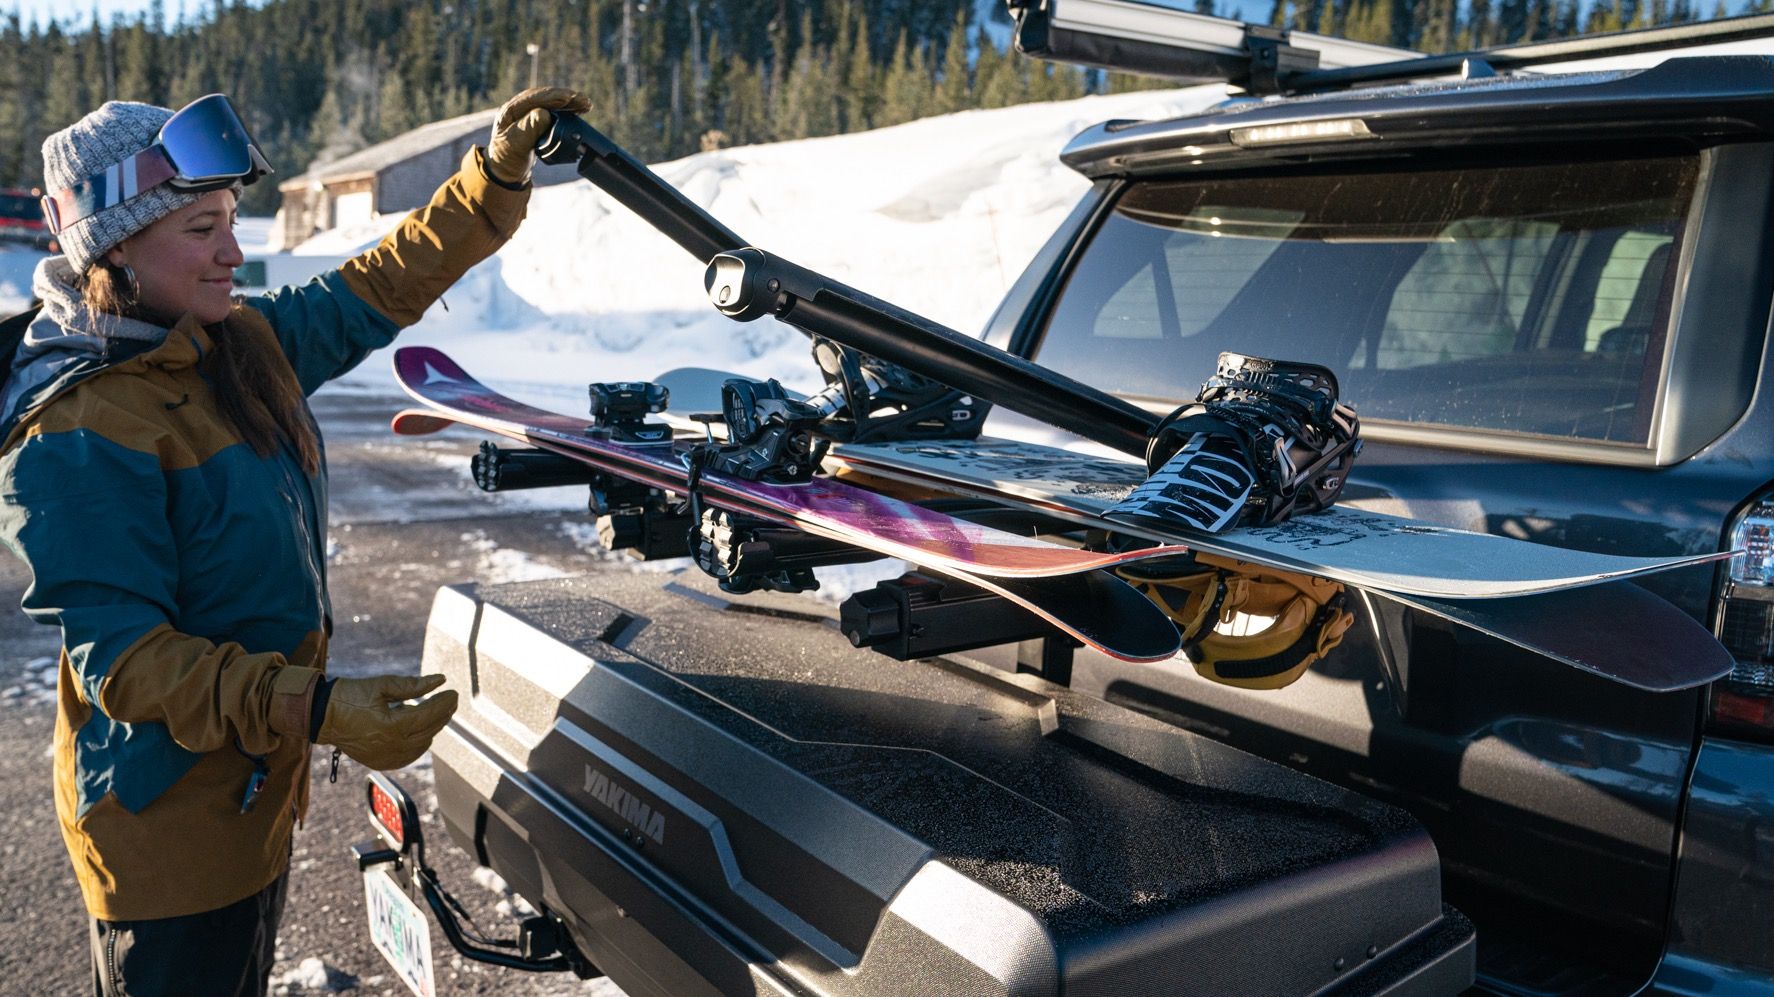 Skis and snowboards being loaded onto a hitch mounted cargo carrier